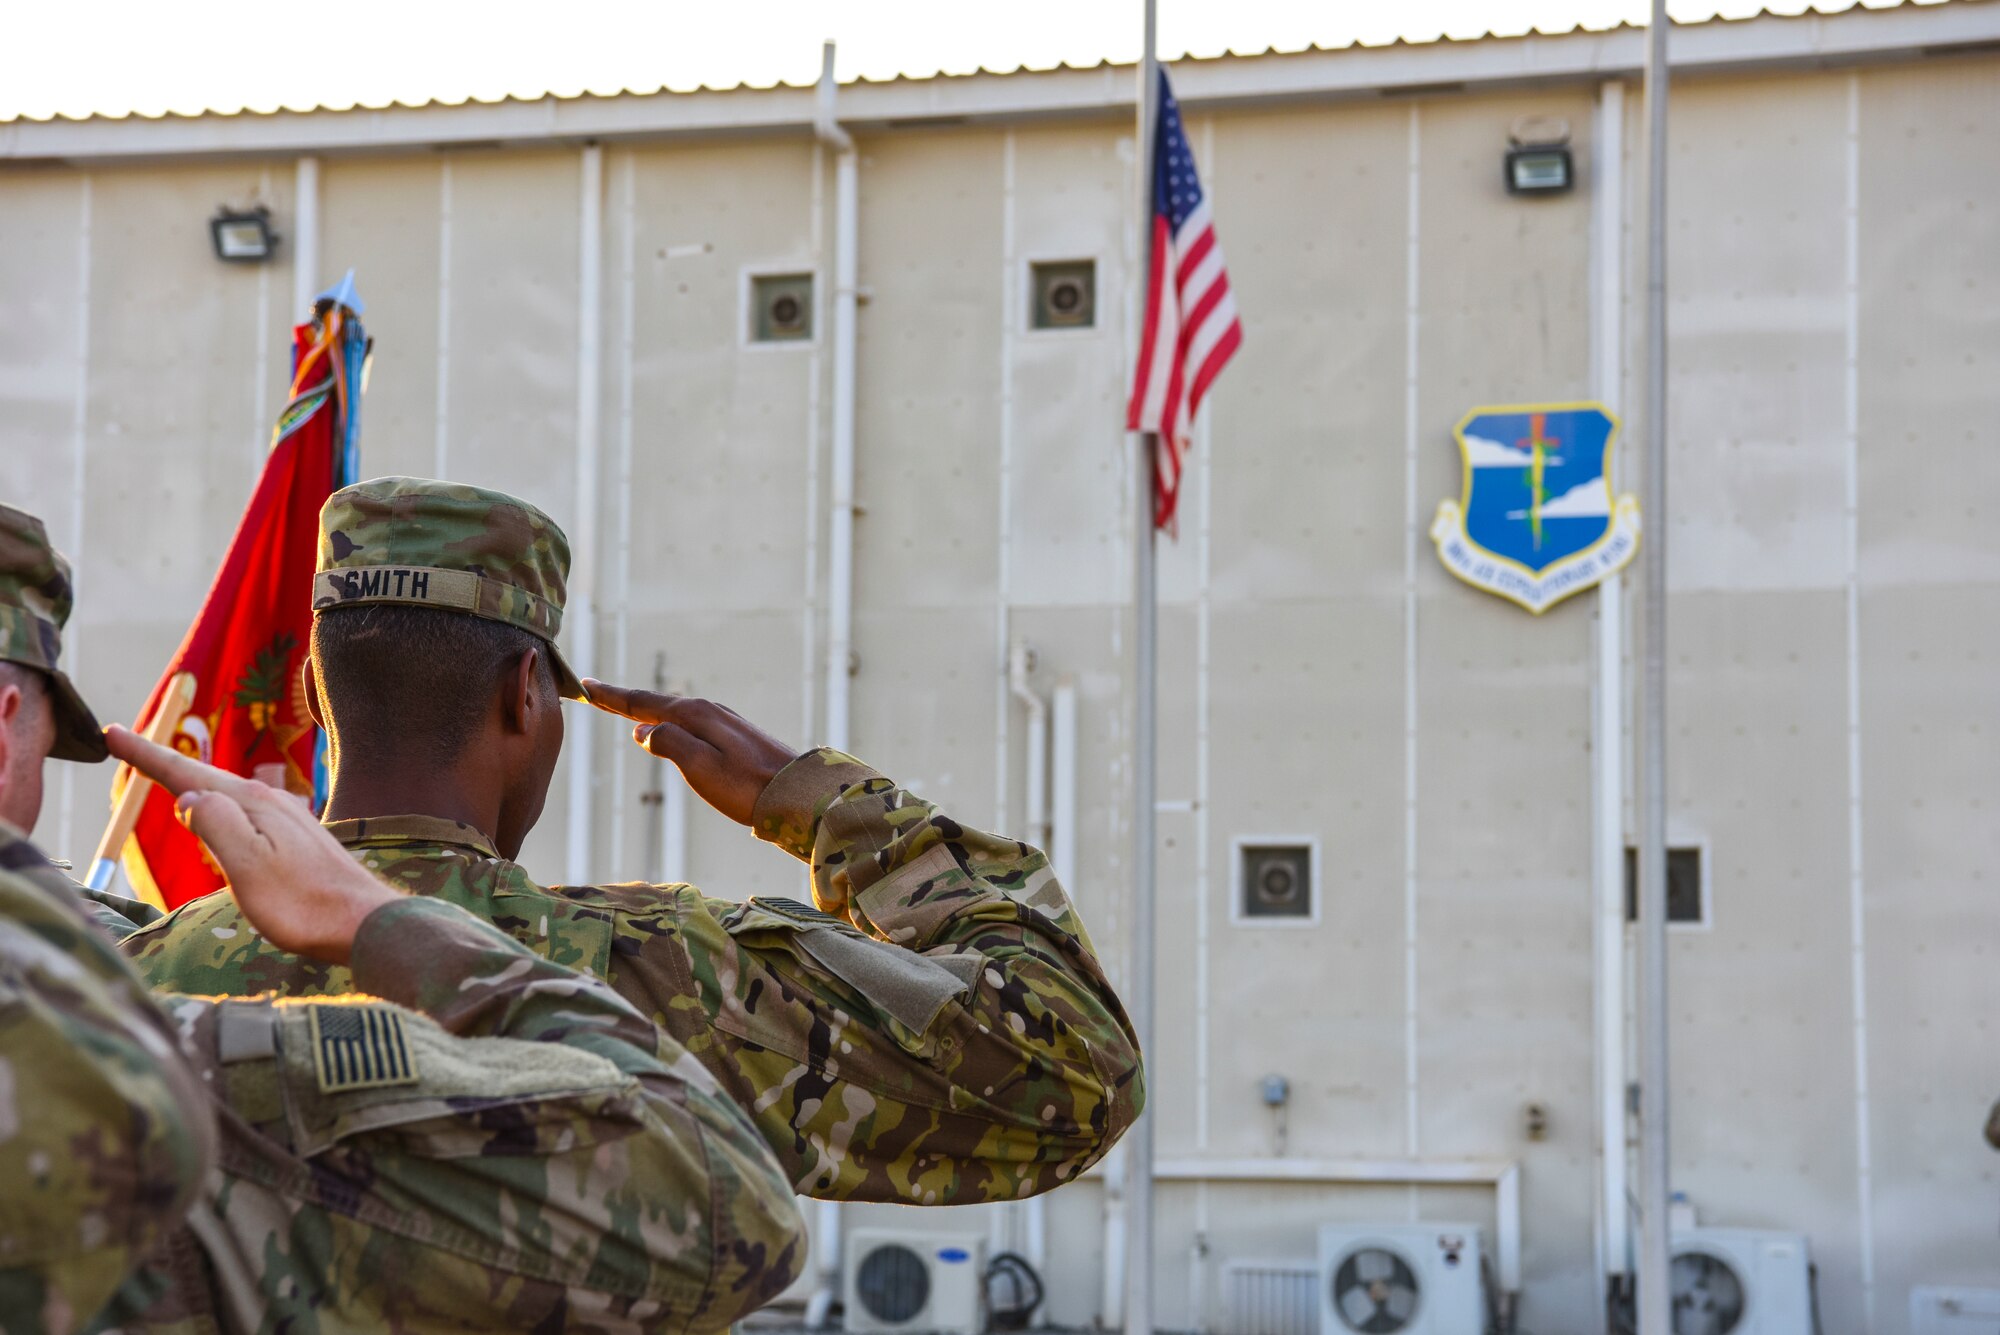 Soldiers assigned to the 1st Battalion, 43rd Air Defense Artillery Regiment render a salute during The National Anthem at a monthly retreat ceremony at Al Dhafra Air Base, United Arab Emirates, Dec. 7, 2018.